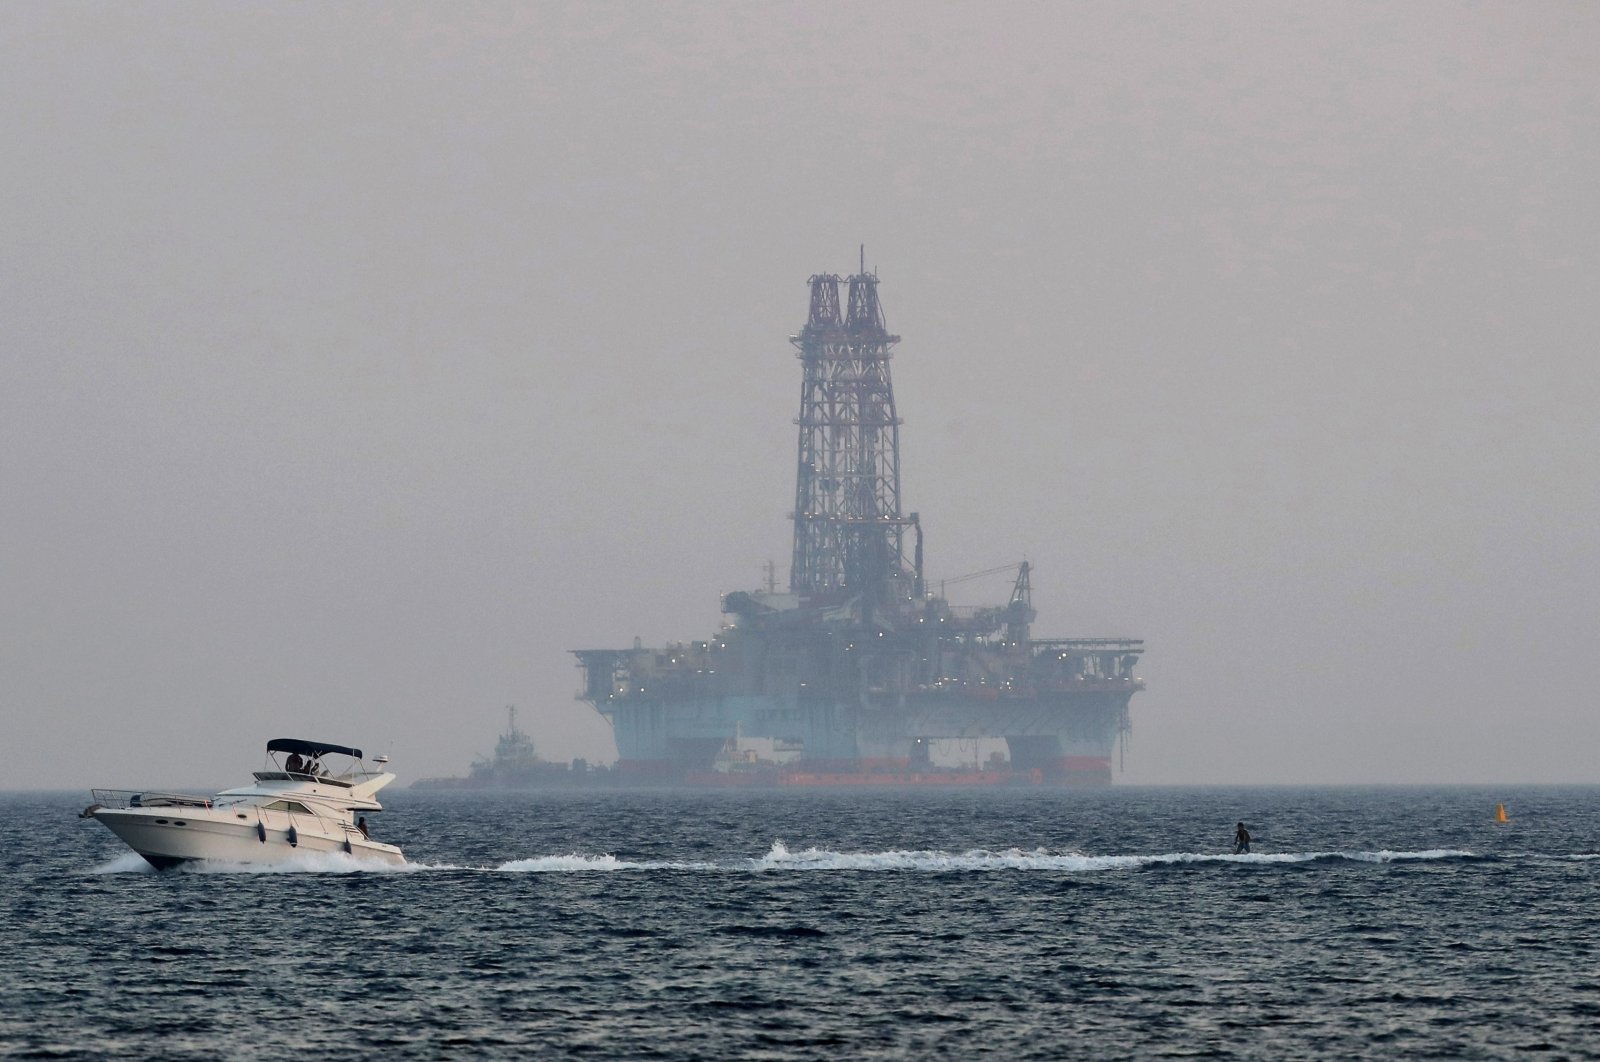 An offshore drilling rig is seen off Cyprus&#039; coastal city of Limassol as a boat passes with a skier, July 5, 2020. (AP Photo)